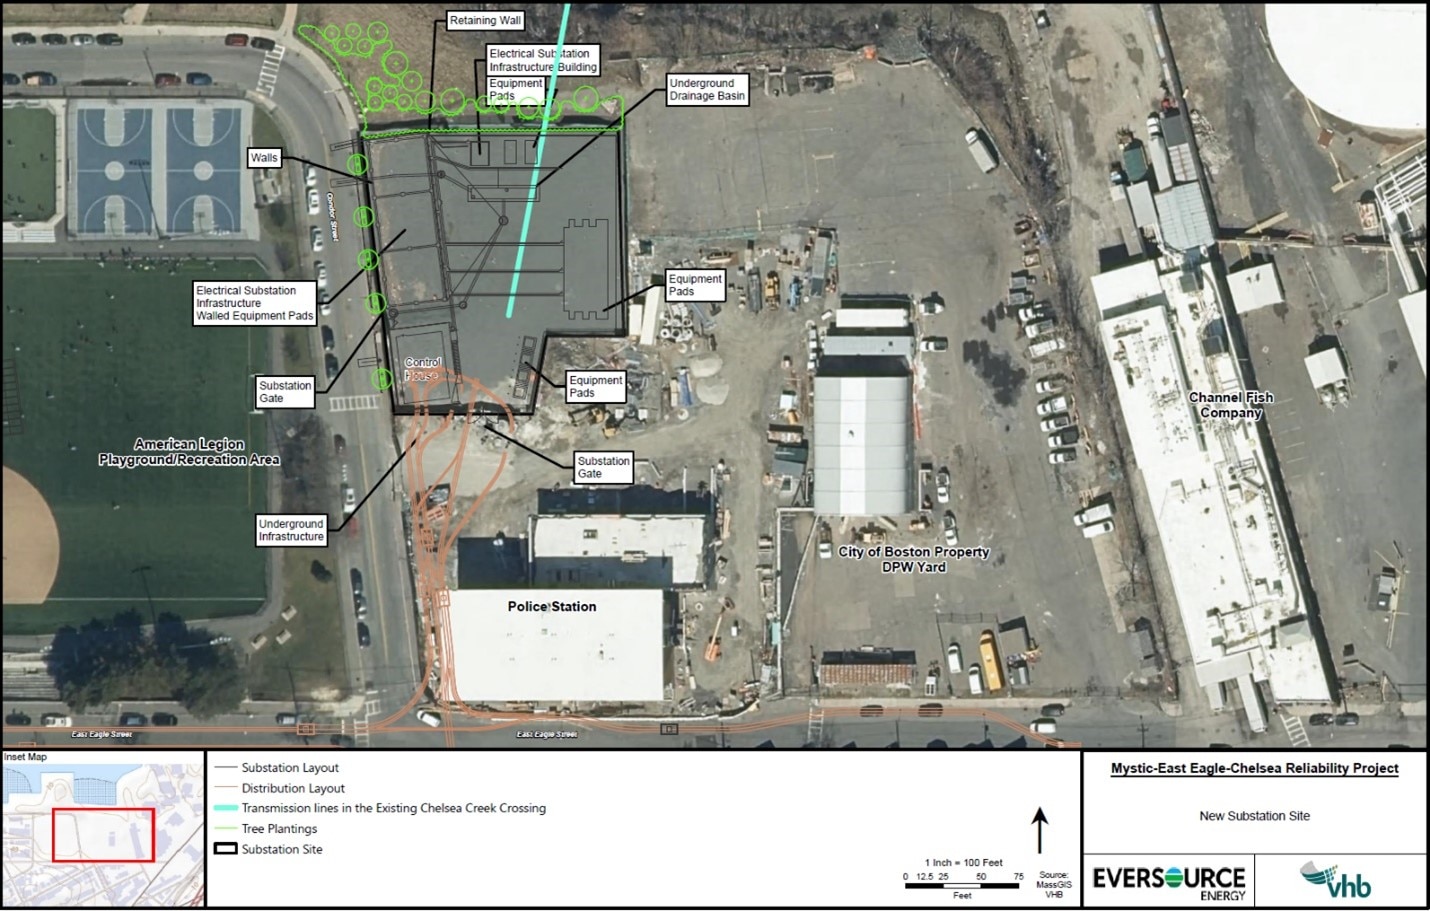 Figure 1. Substation Site Overview